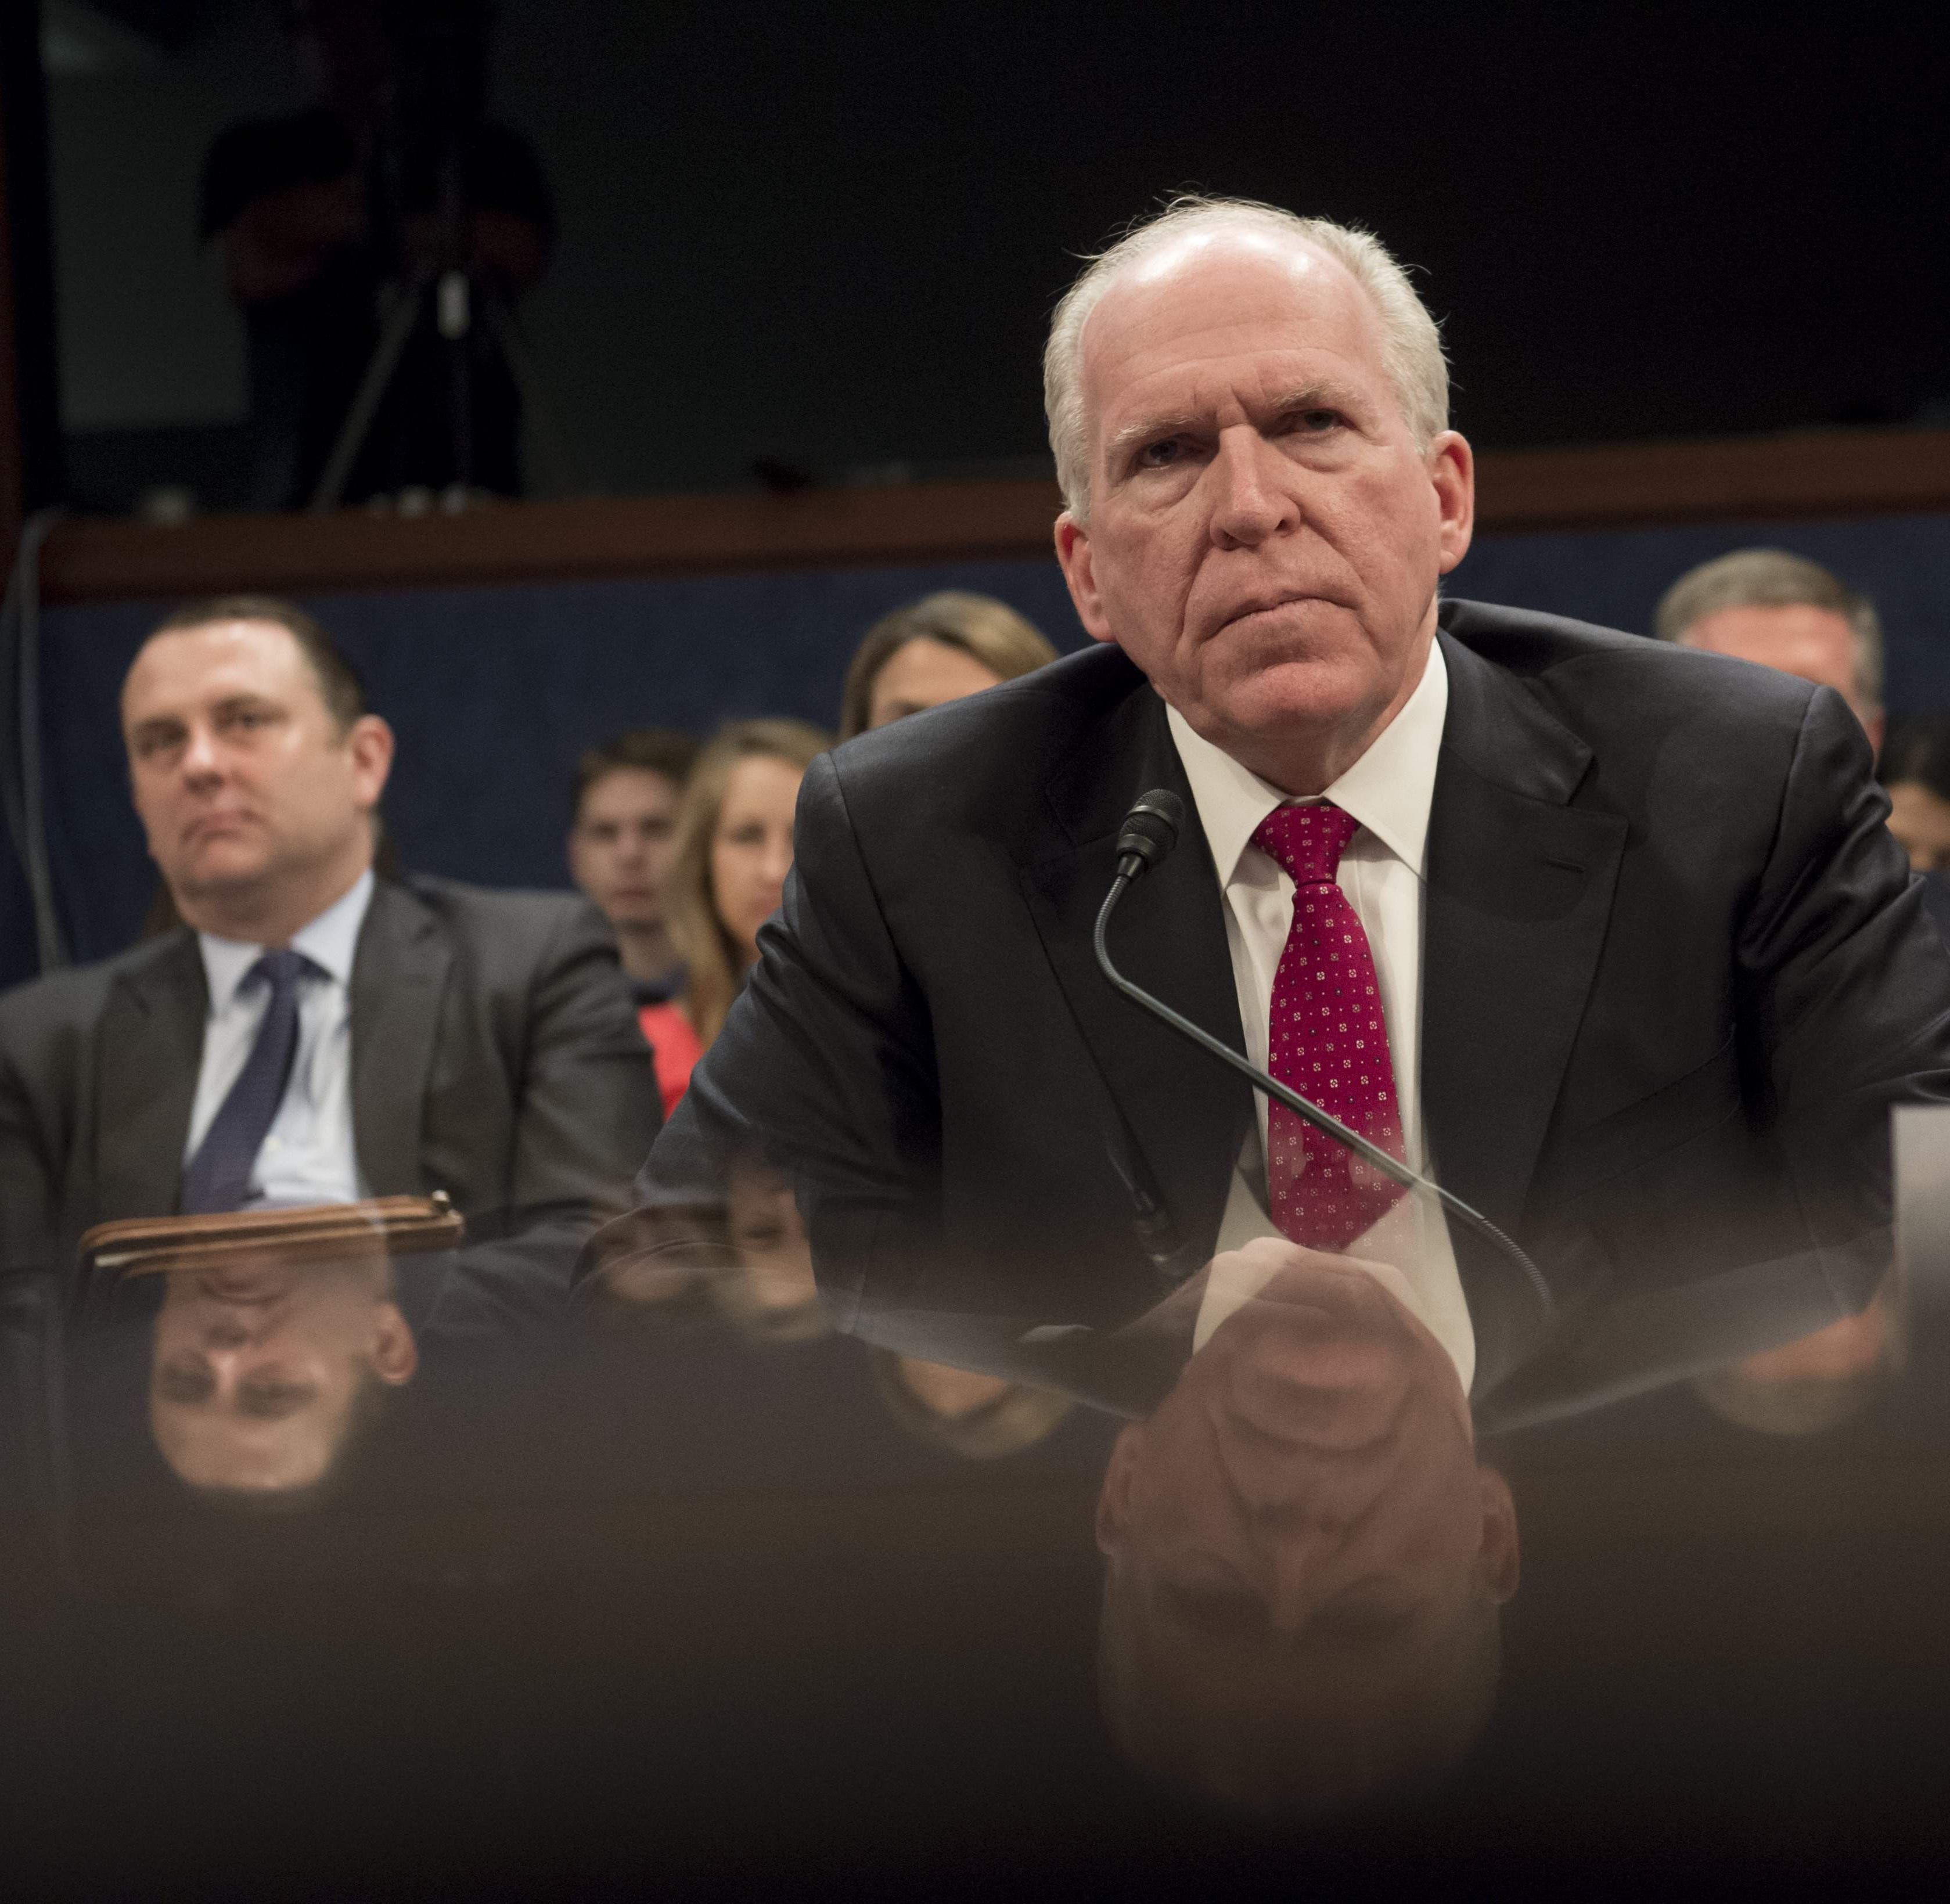 (FILES) In this file photo taken on May 23, 2017, former CIA Director John Brennan testifies during a House Permanent Select Committee on Intelligence hearing about Russian actions during the 2016 election on Capitol Hill in Washington, DC. - US Pres